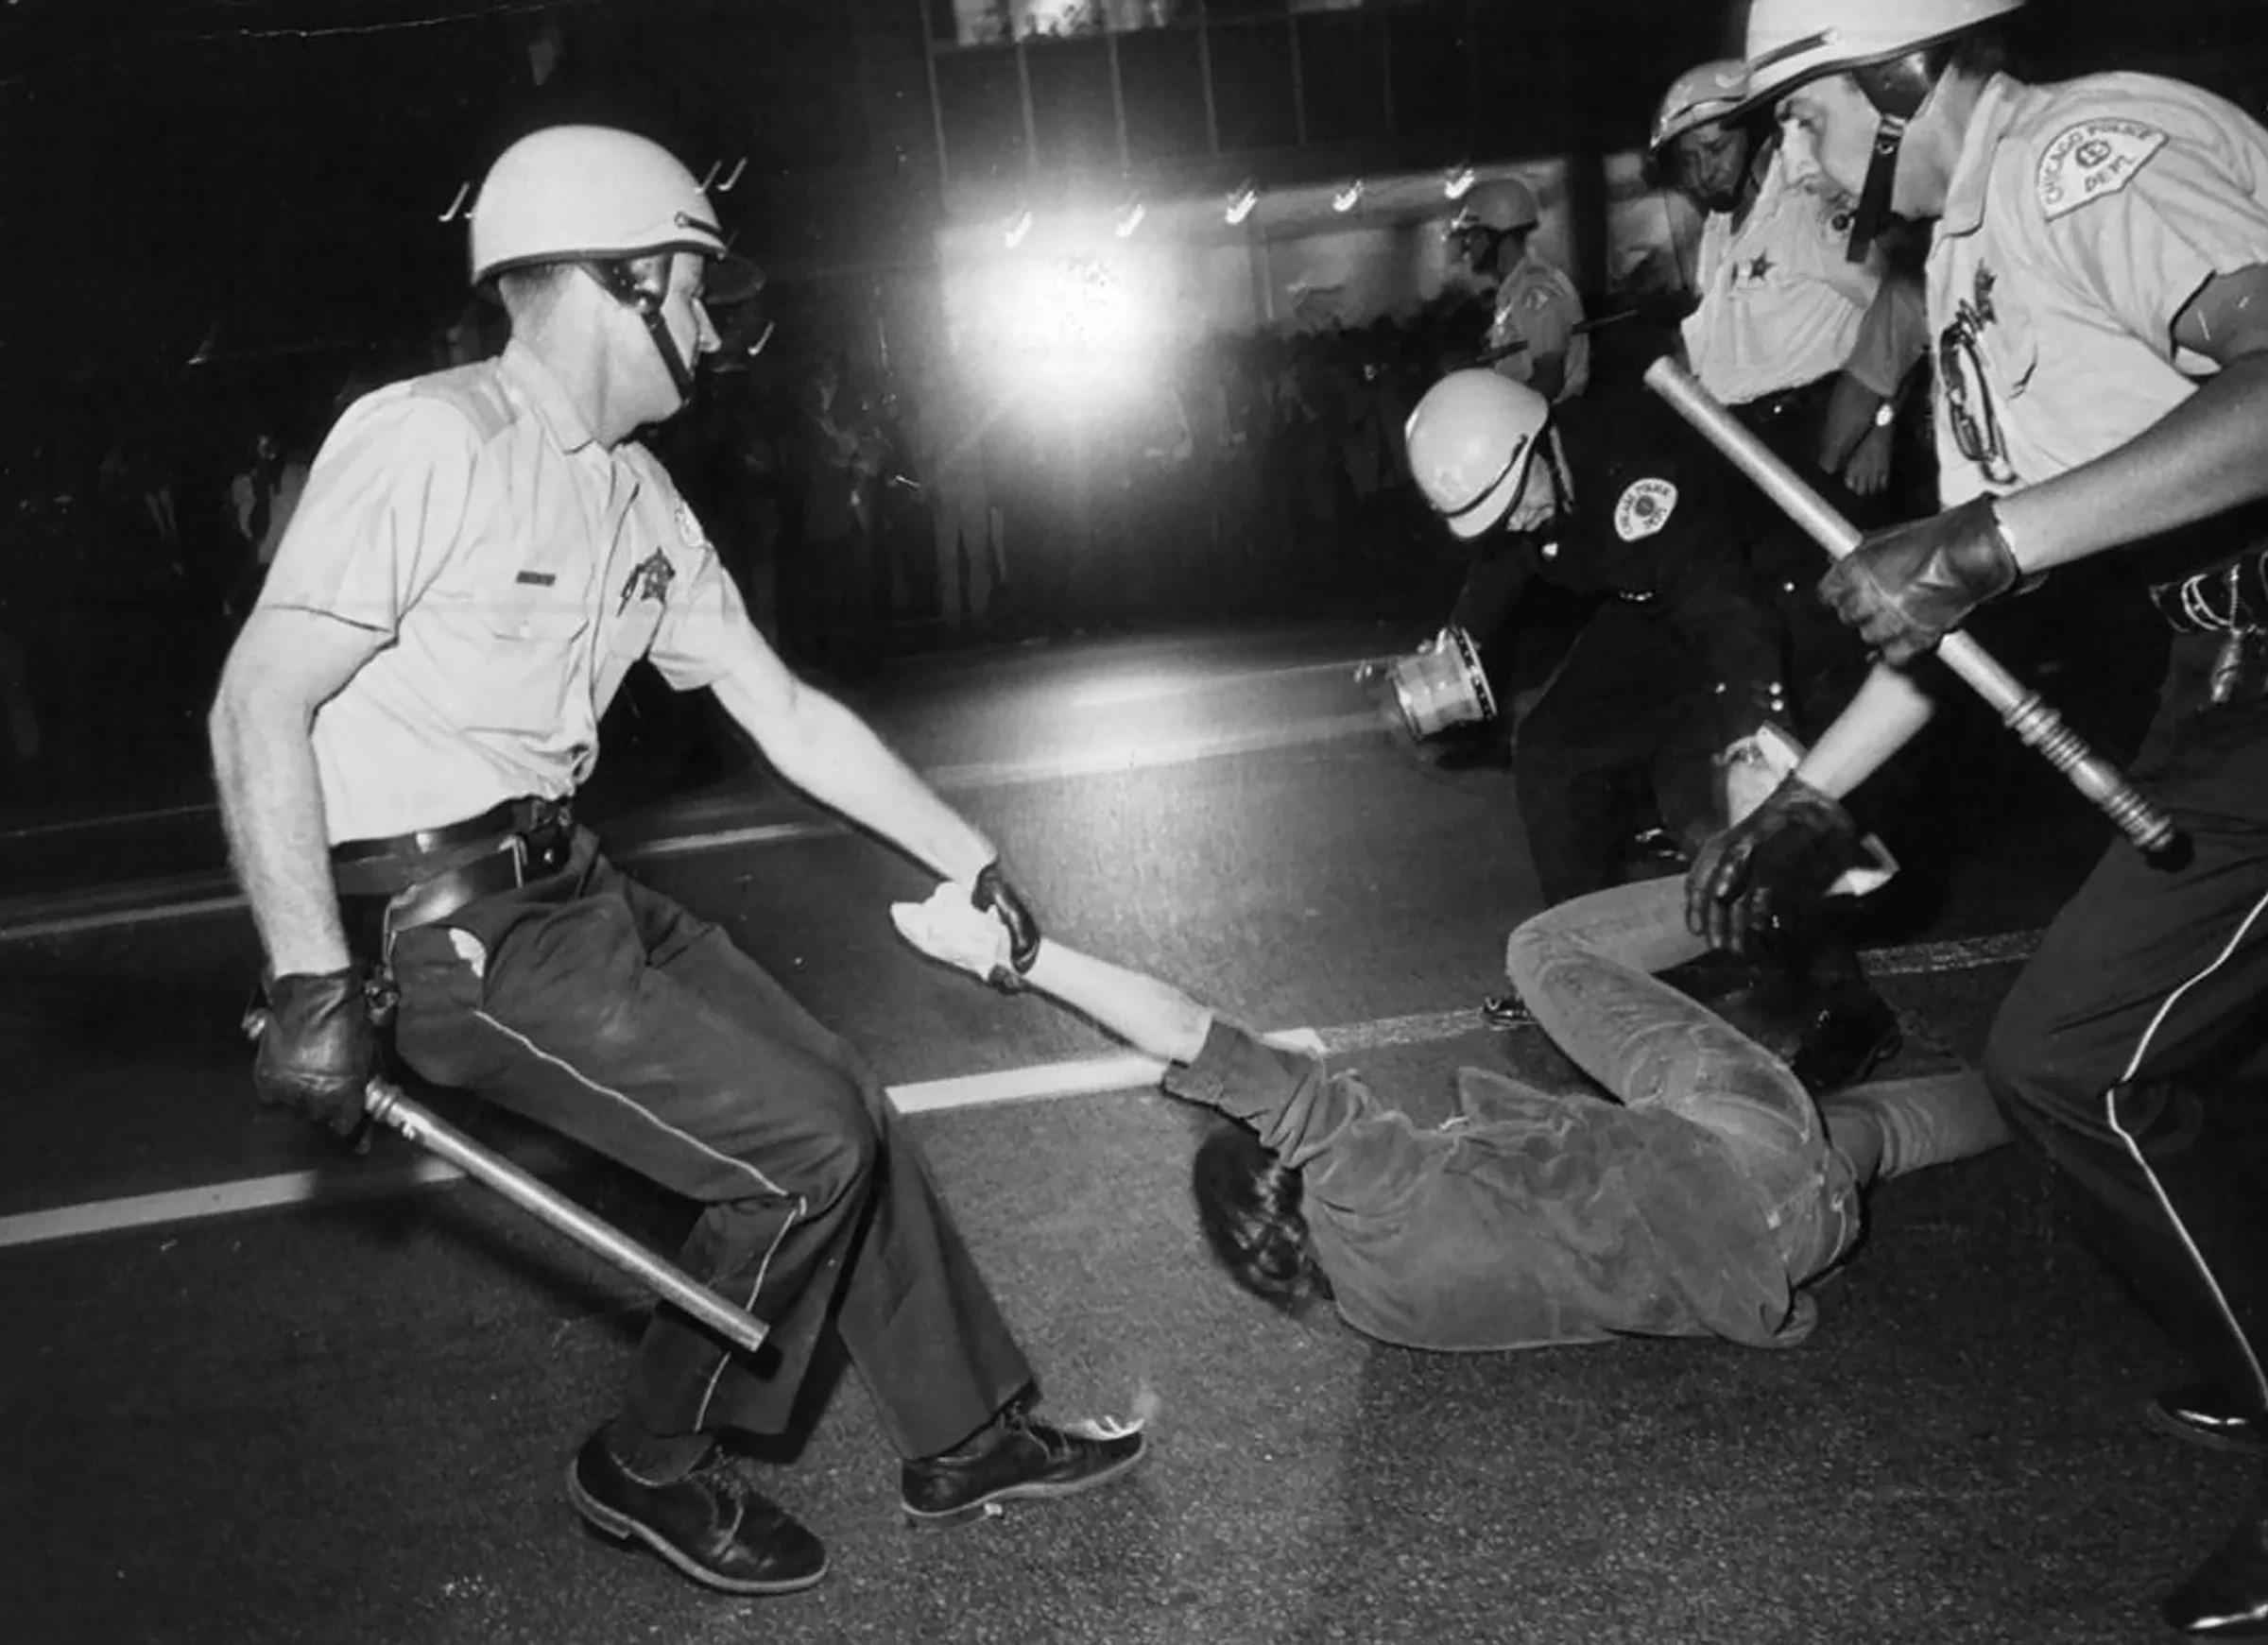 The police detain a demonstrator in front of the Conrad Hilton during the 1968 Democratic National Convention in Chicago, Aug. 29, 1968. (Barton Silverman/The New York Times)